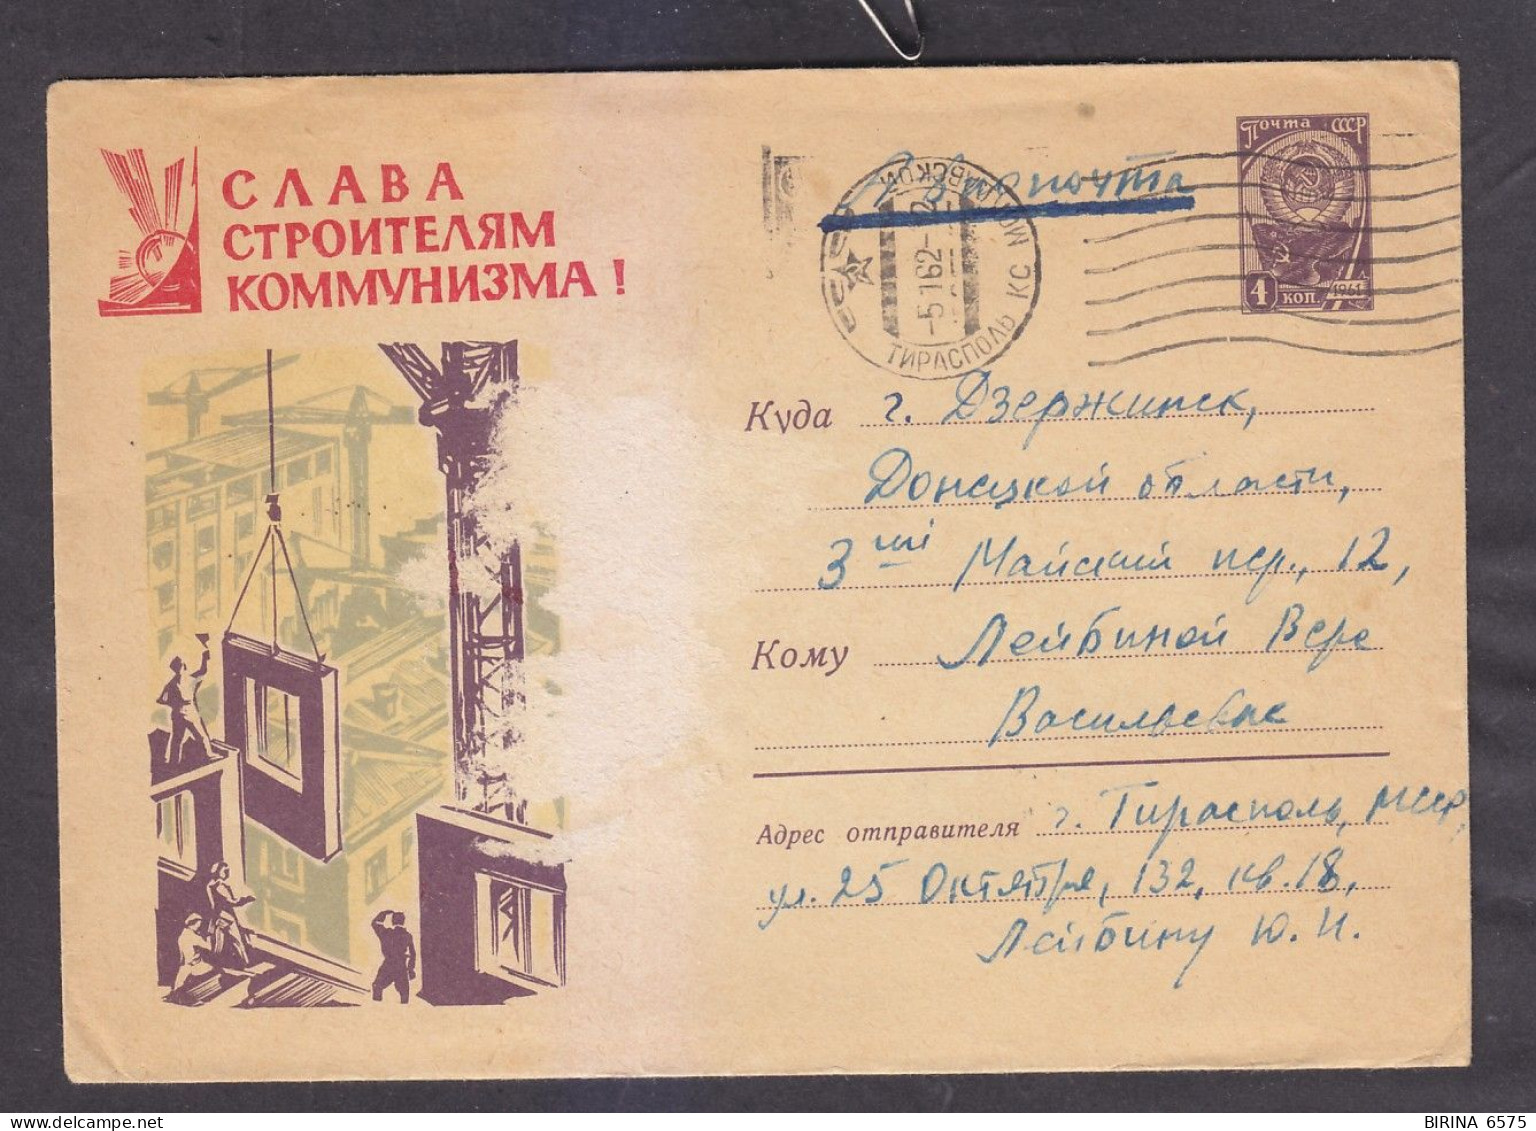 Envelope. The USSR. GLORY TO THE BUILDERS OF COMMUNISM!. Mail. 1962. - 8-44 - Lettres & Documents